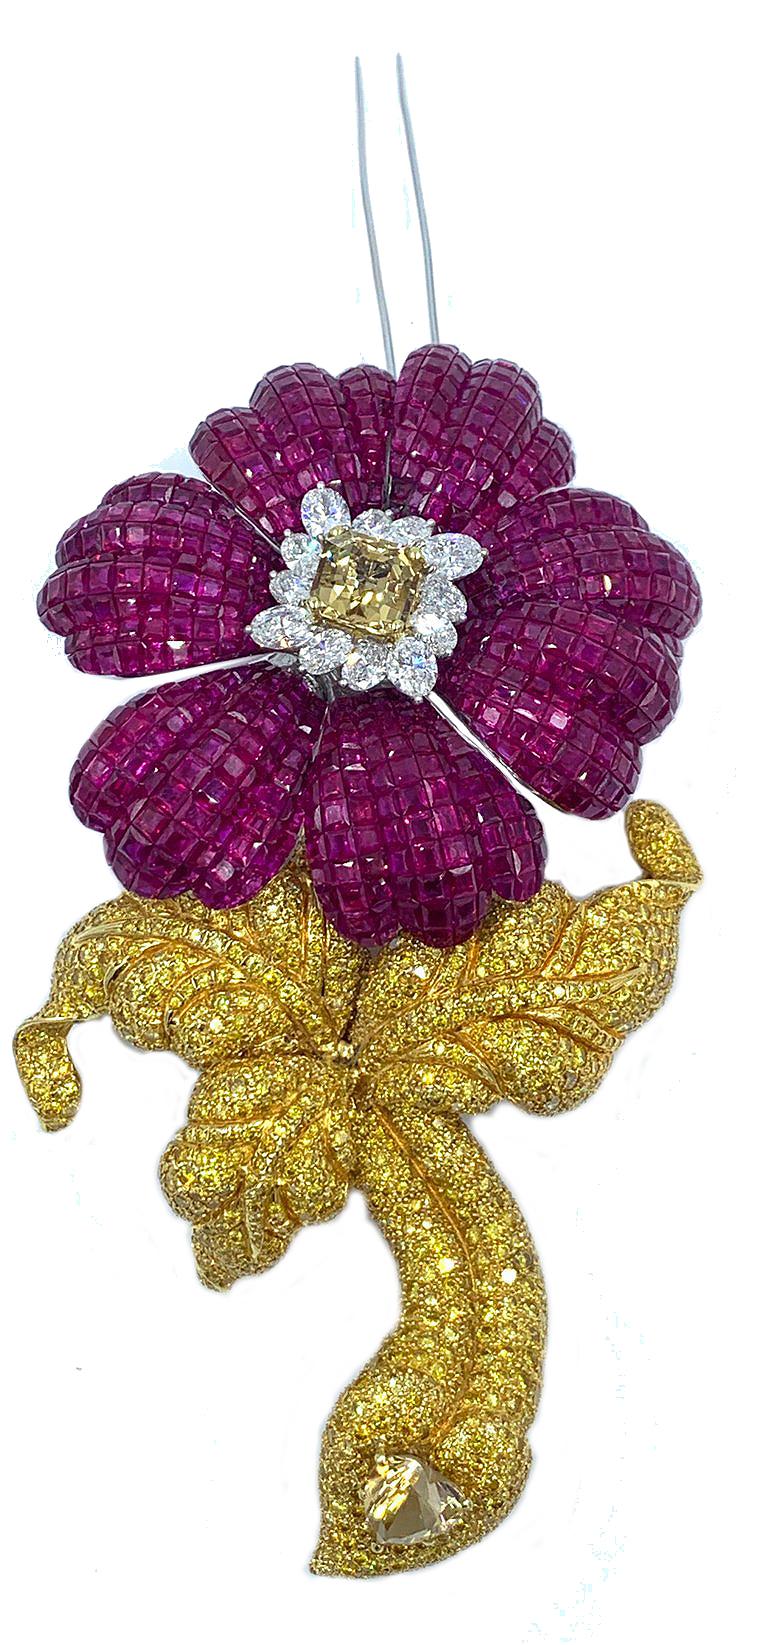 This massive and fabulously over the top ruby  and canary diamond flower brooch with removable stem contains approximately 100 carats of glistening red rubies in the flower part.  The flower is centered with a citrine surrounded by 4 carats of